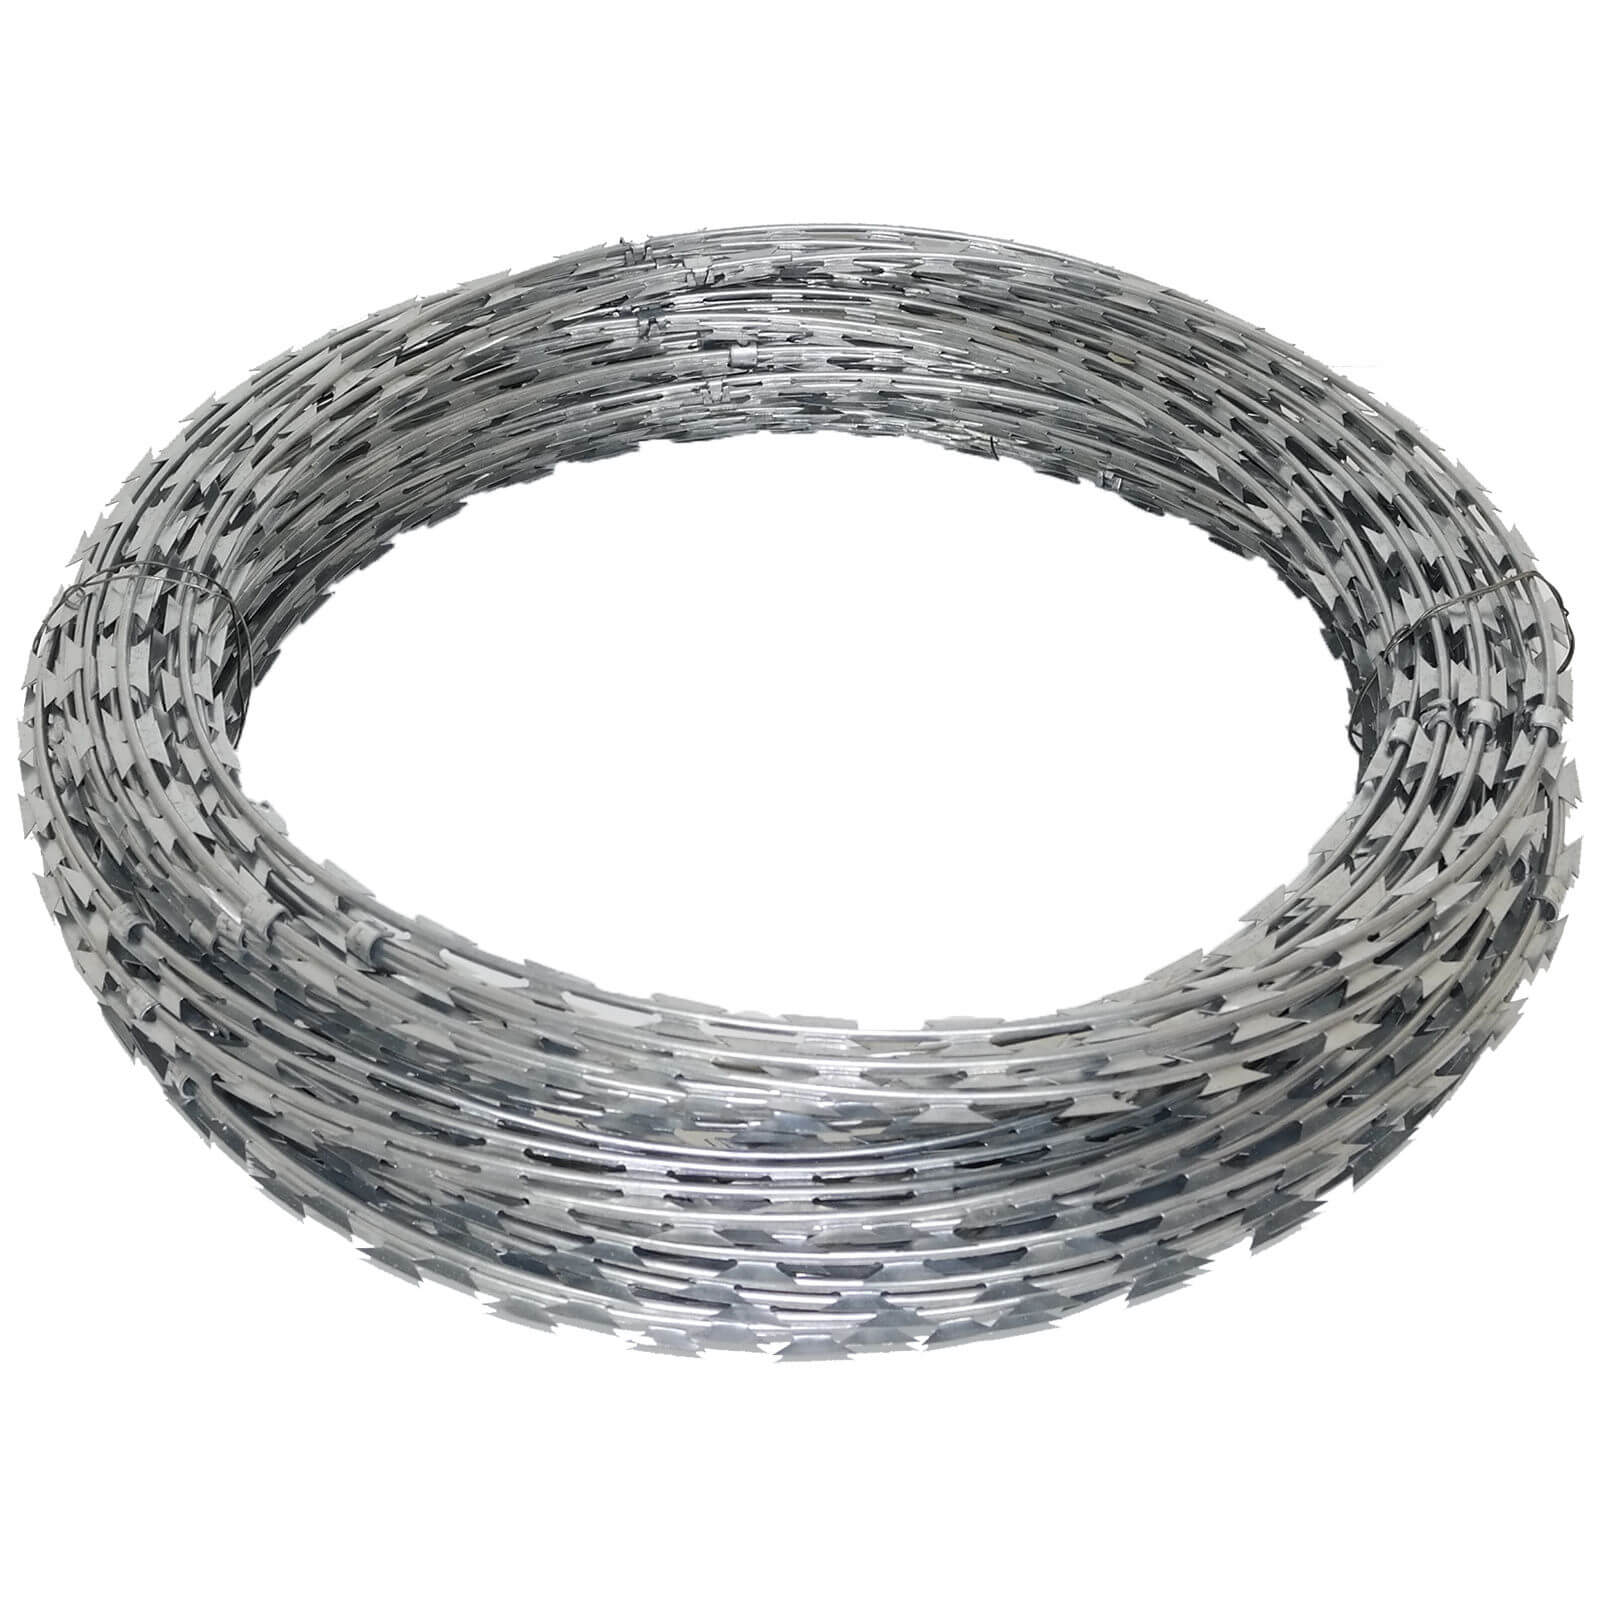 Razor wire fencing: ensuring the safety of people and property